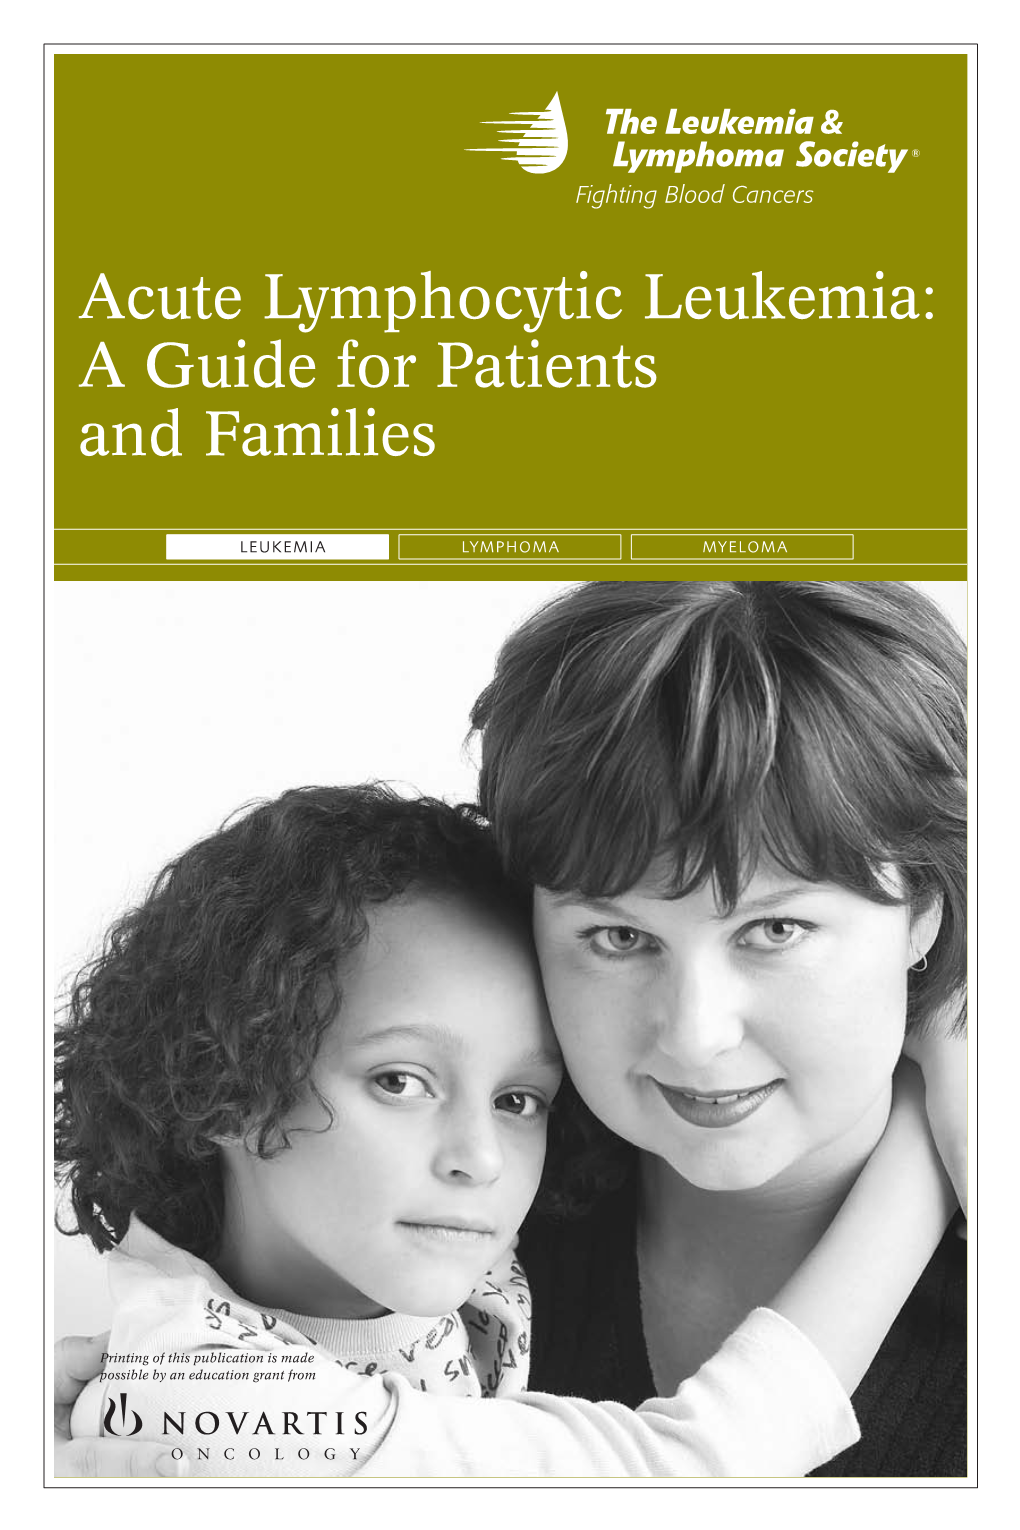 Acute Lymphocytic Leukemia: a Guide for Patients and Families About 3,970 Americans Will Be Diagnosed with Acute Lymphocytic Leukemia (ALL) This Year